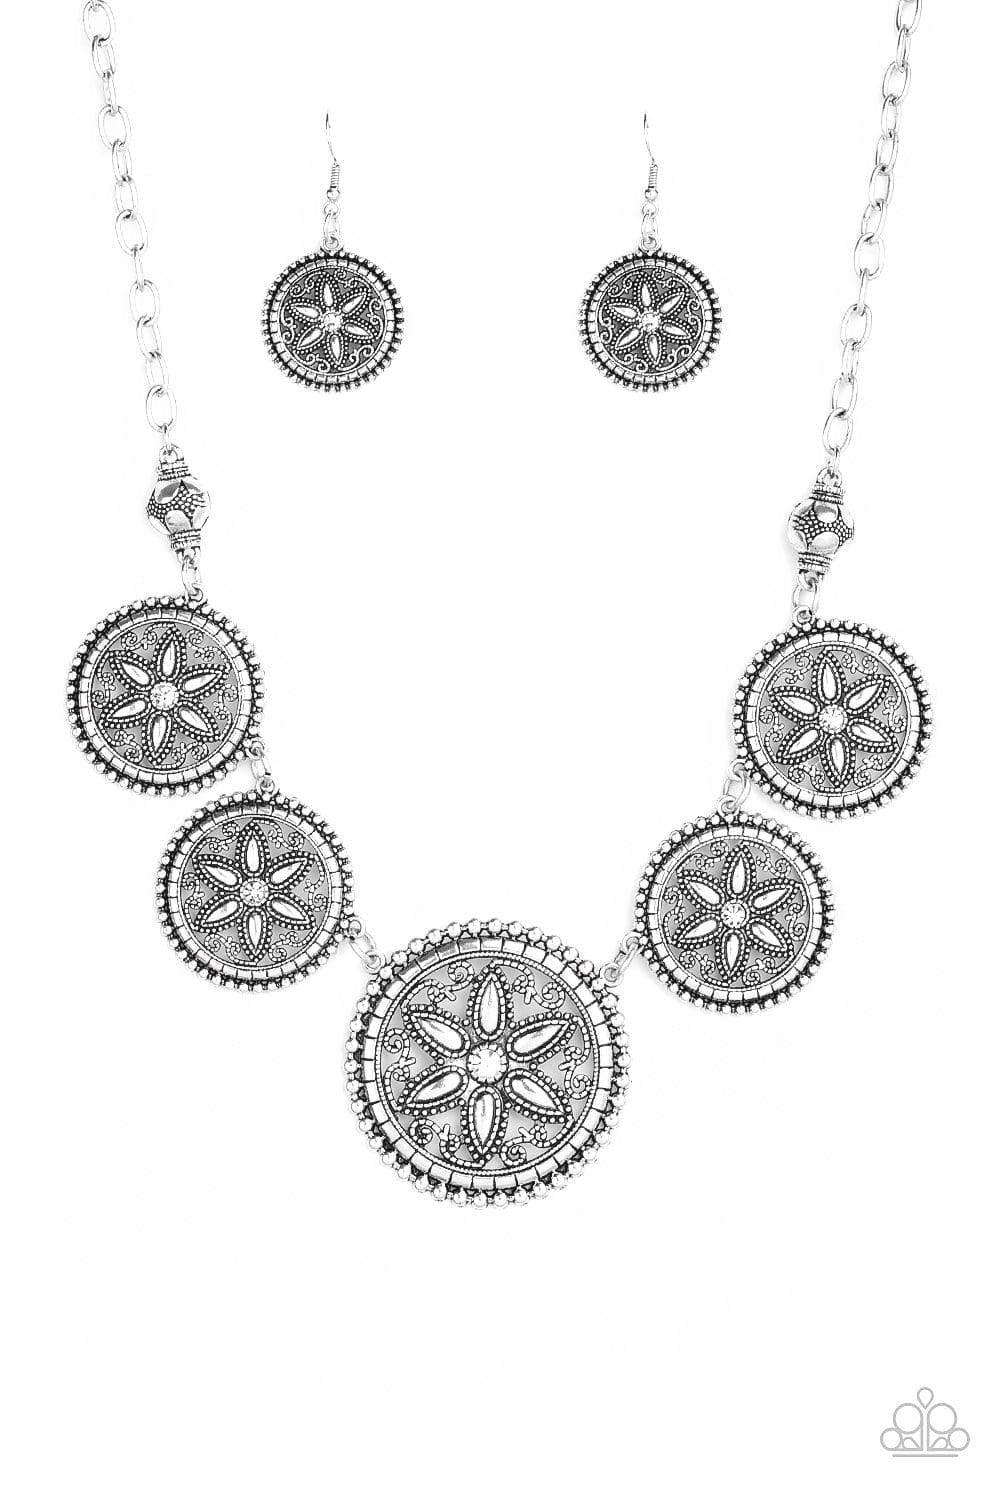 Paparazzi Accessories - Written In The Star Lilies And Funky Flower Child - White Necklace & Bracelet Set - Bling by JessieK